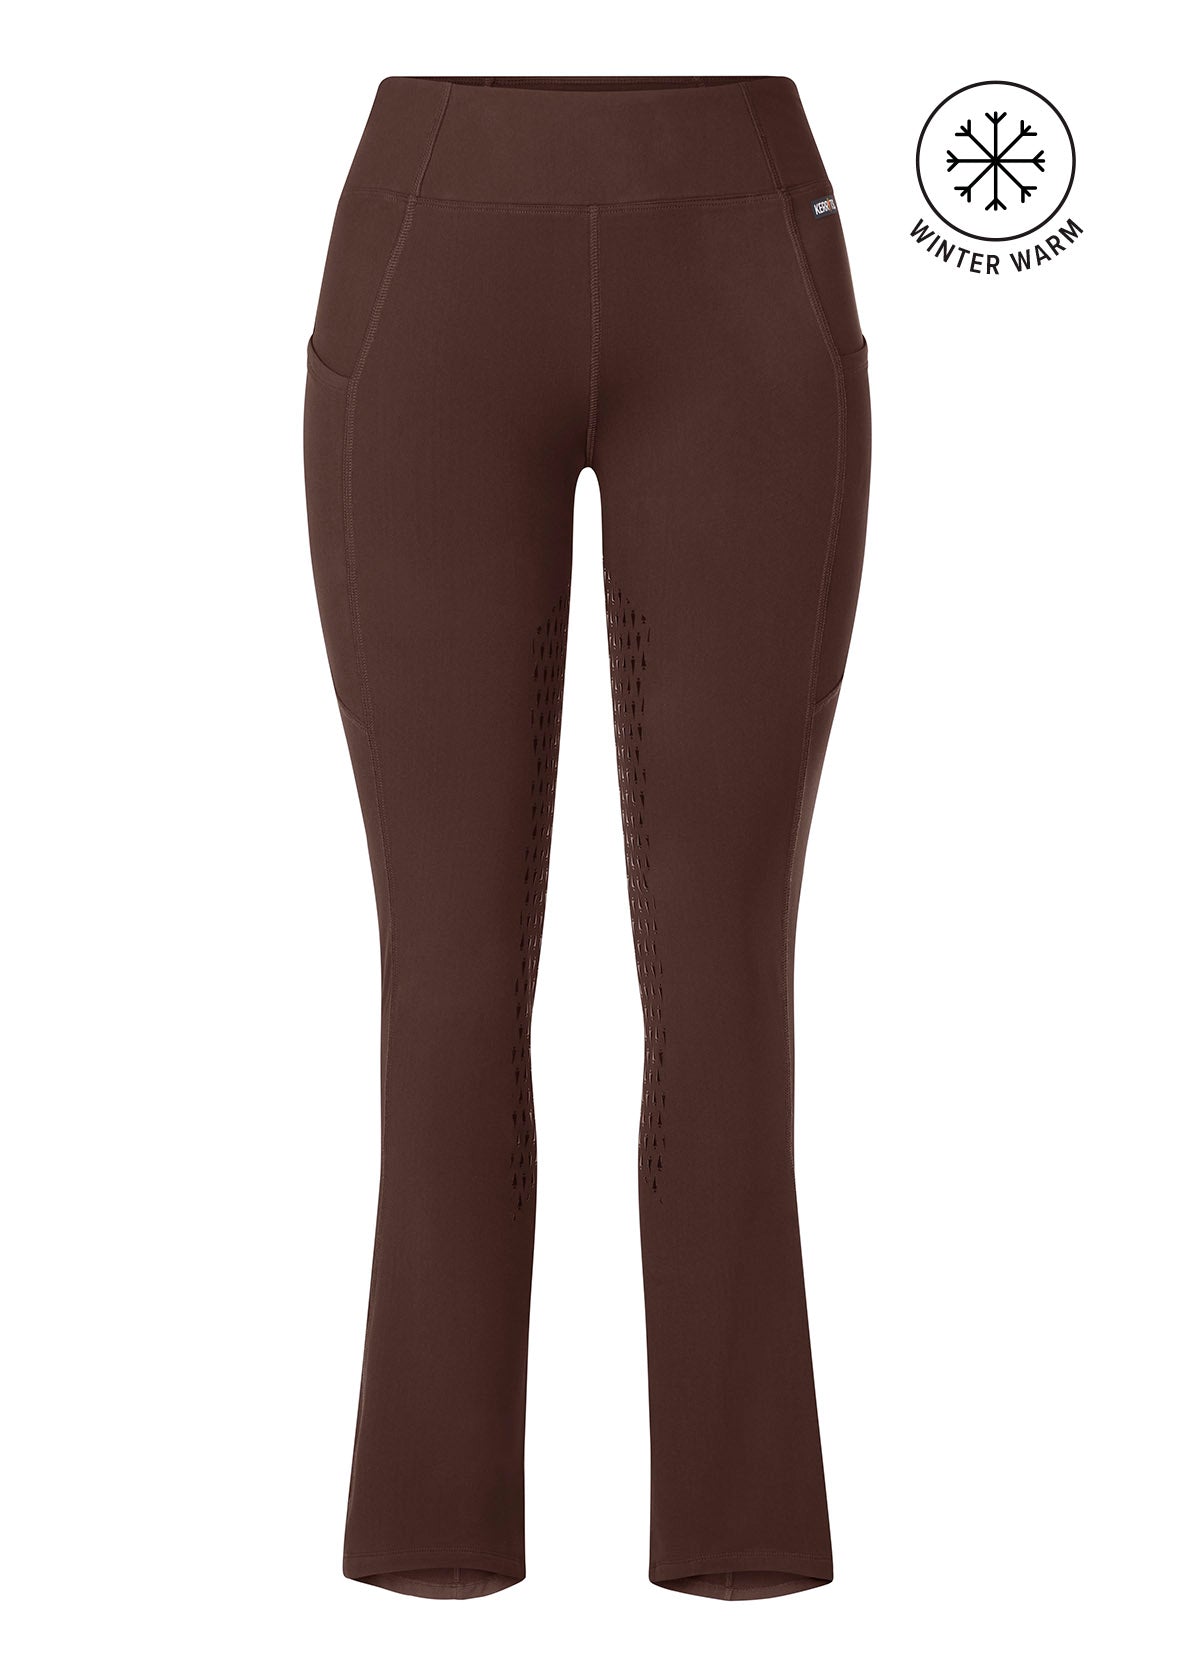 Kerrits Thermo Tech Full Leg Tight Print - Everything Equine